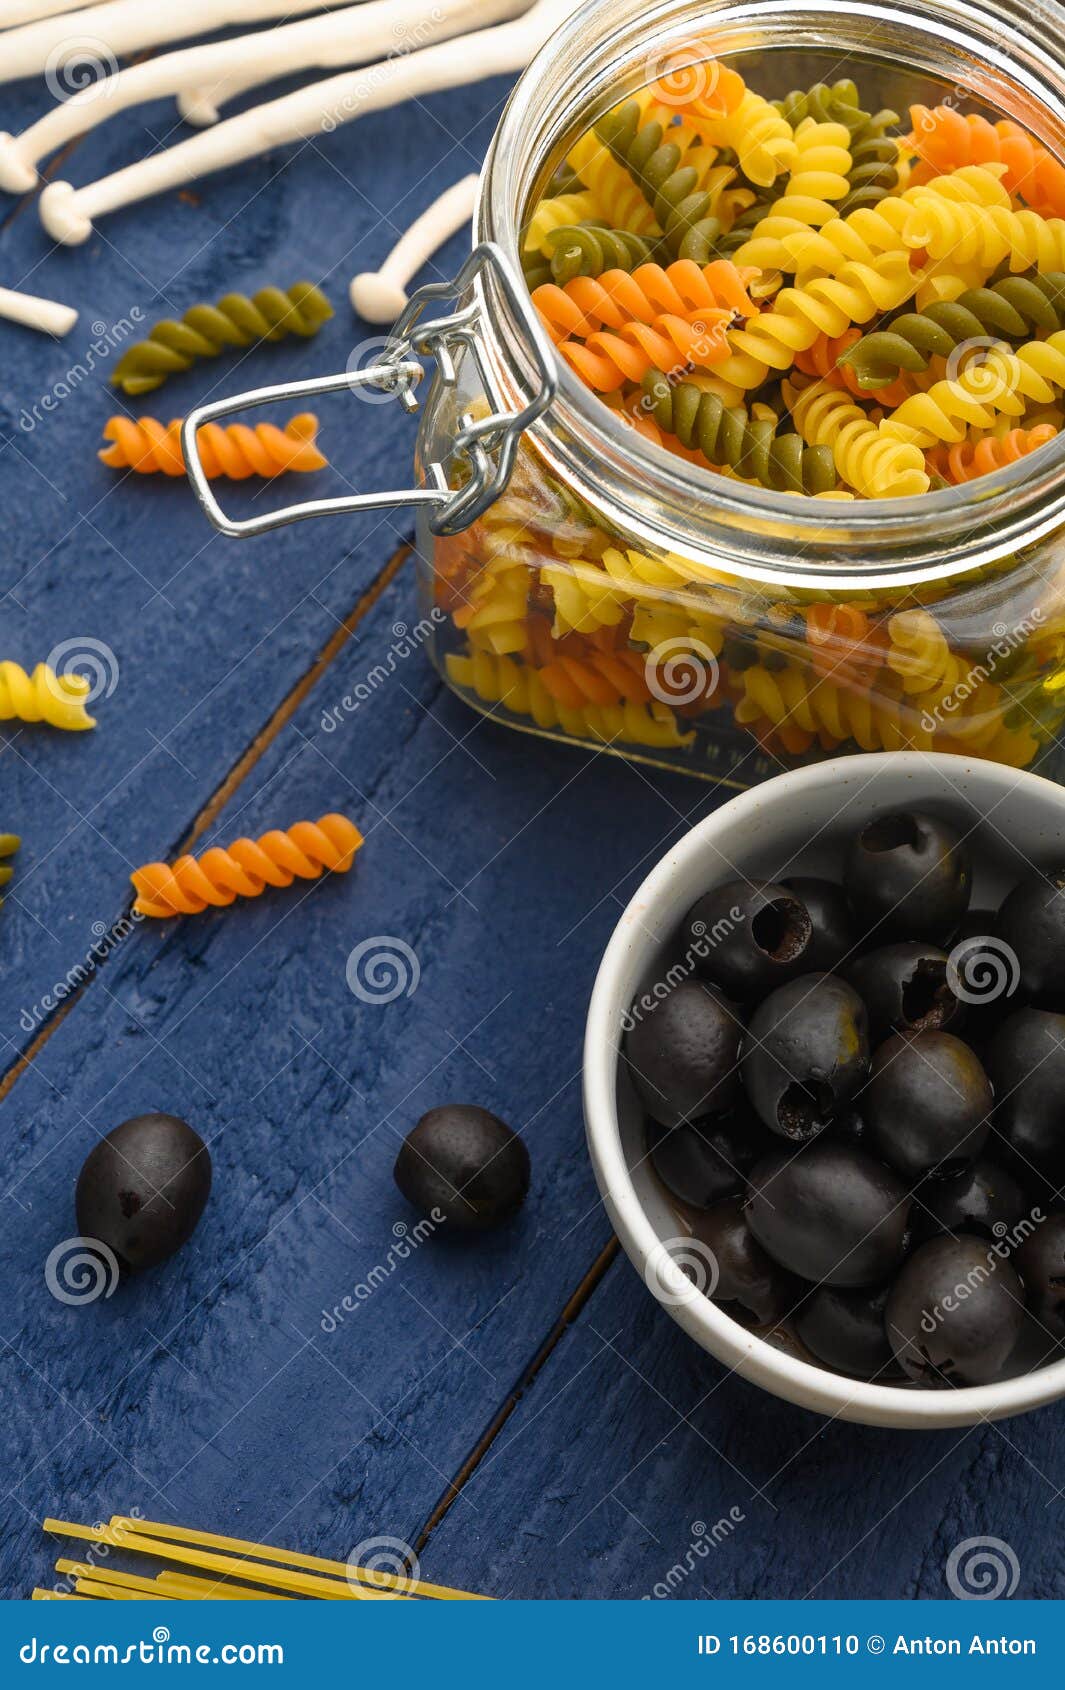 Italian Or Greek Olive Oil With Spaghetti Or Pasta And Olives Vertical Frame Stock Photo Image Of Cuisine Cheese 168600110,Sauteed Mushrooms